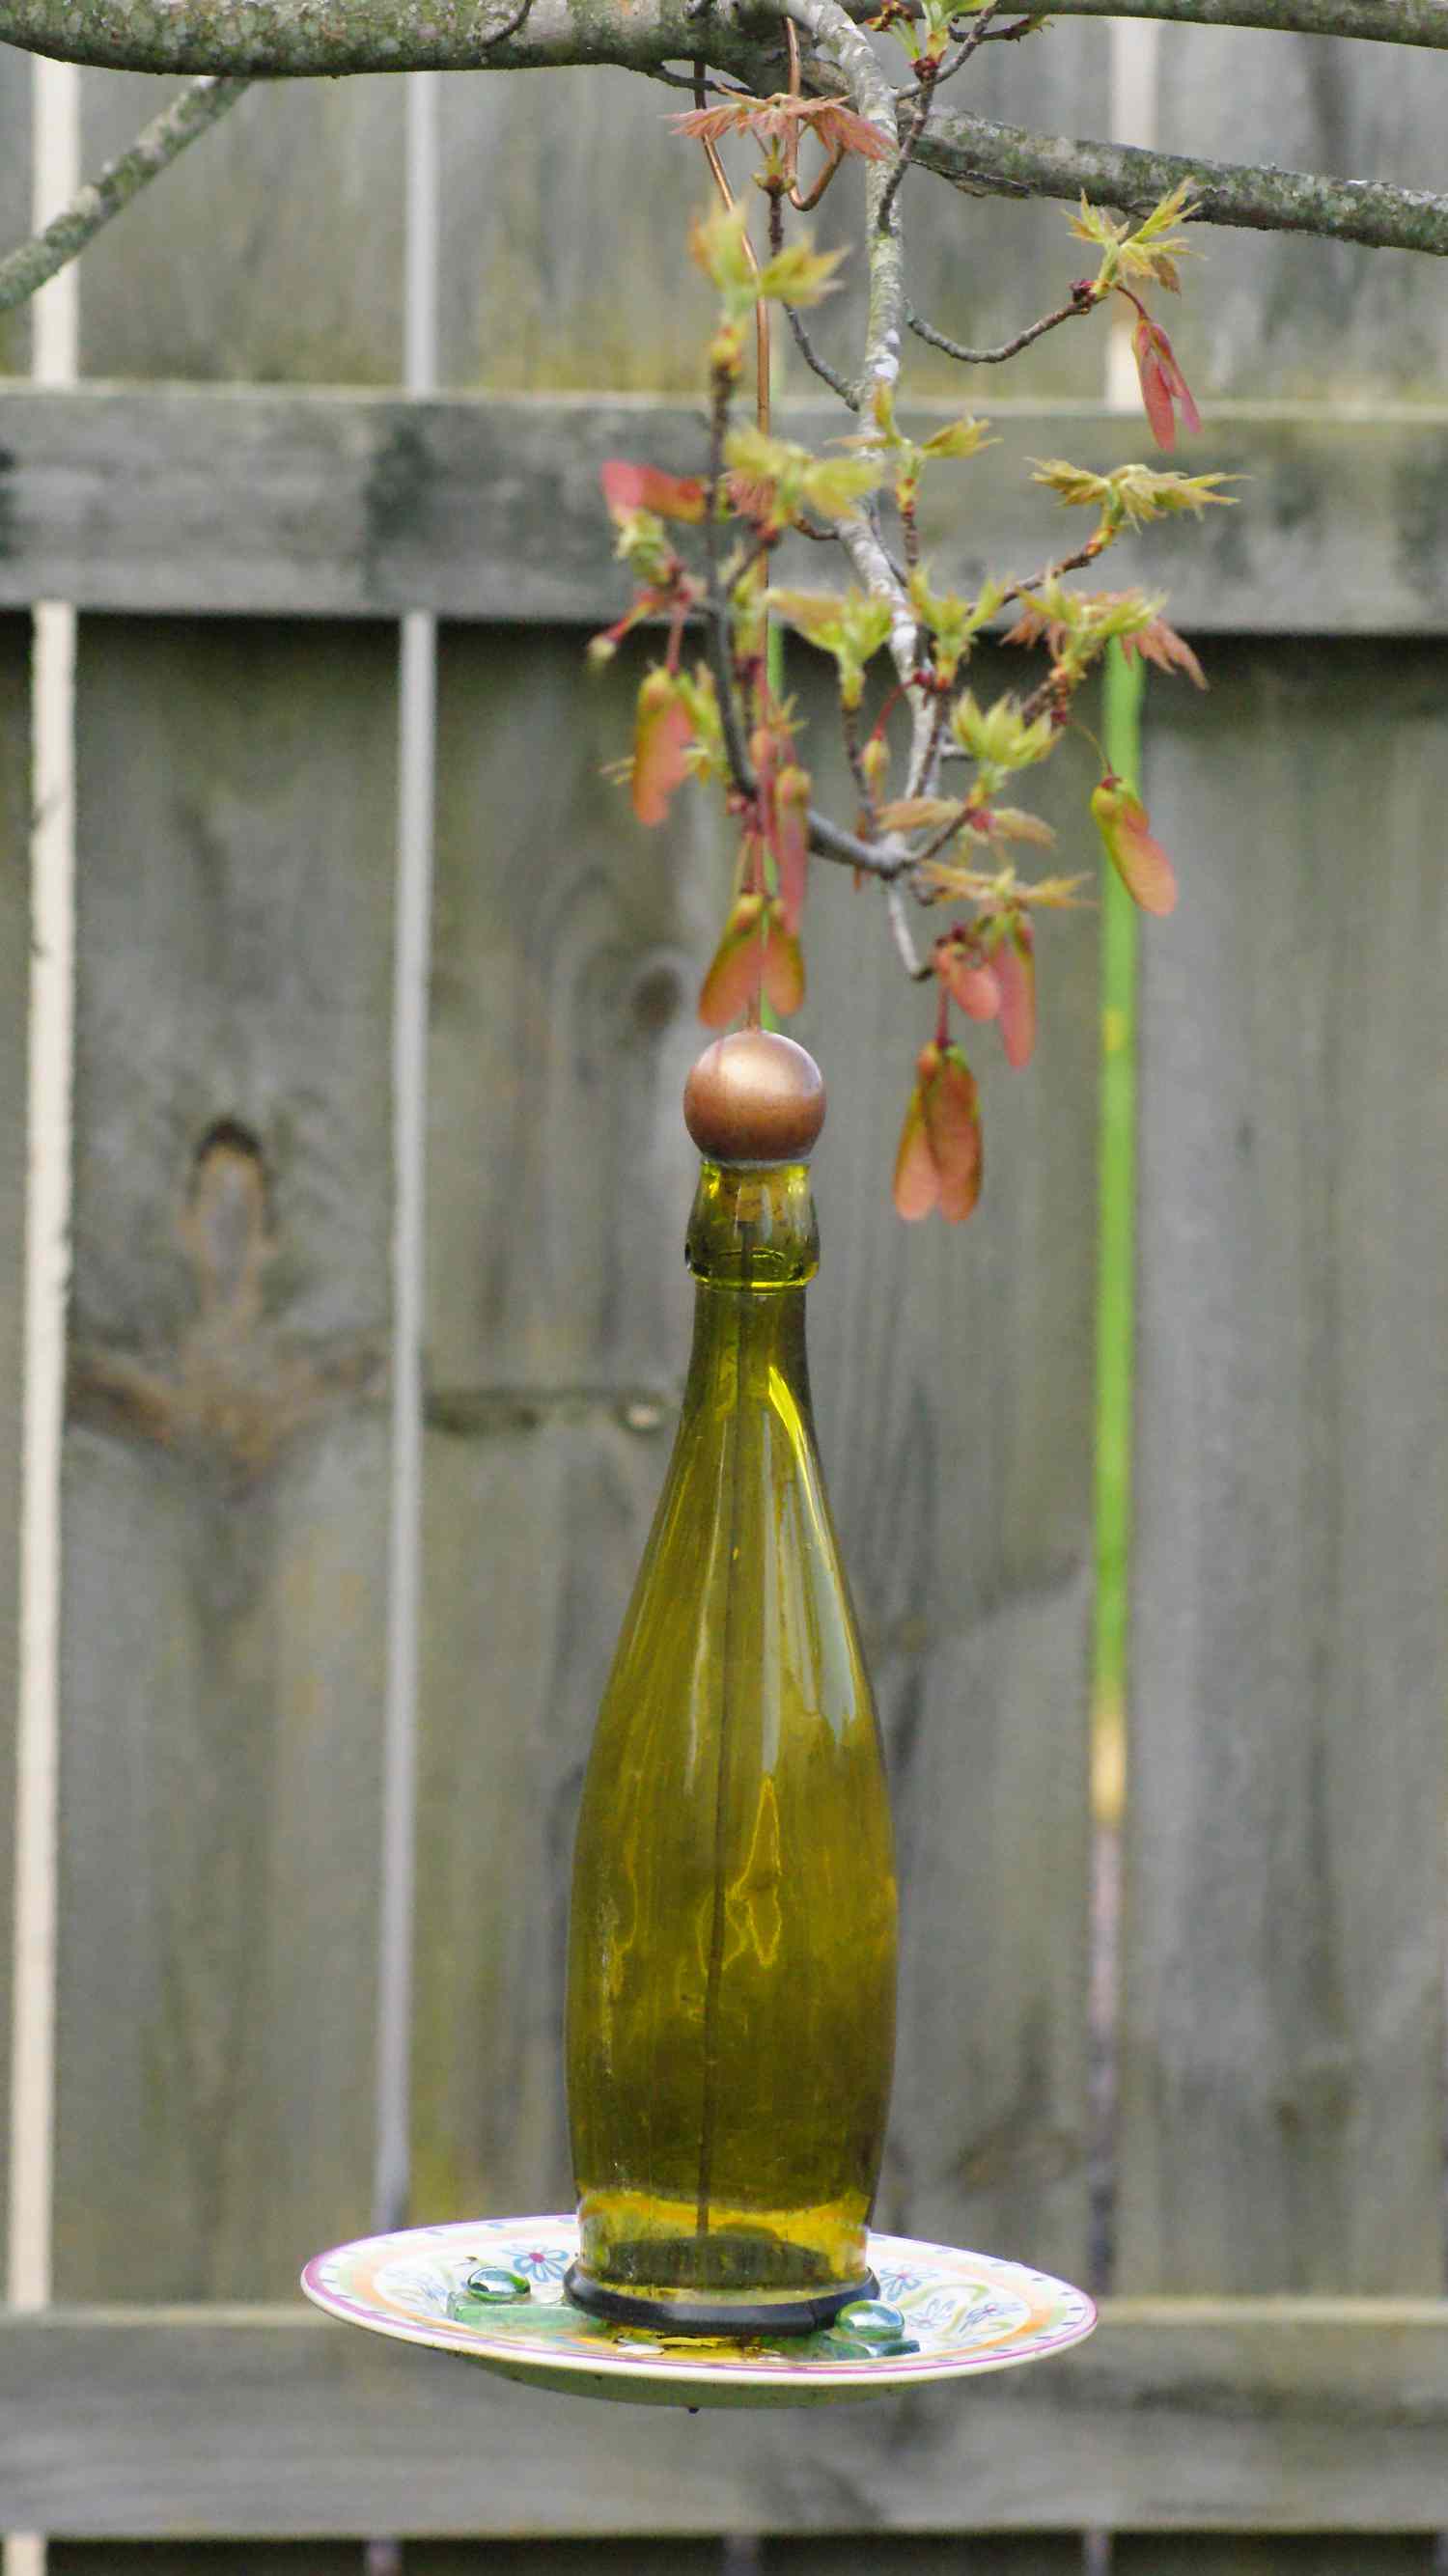 Bird feeder made out of a wine bottle